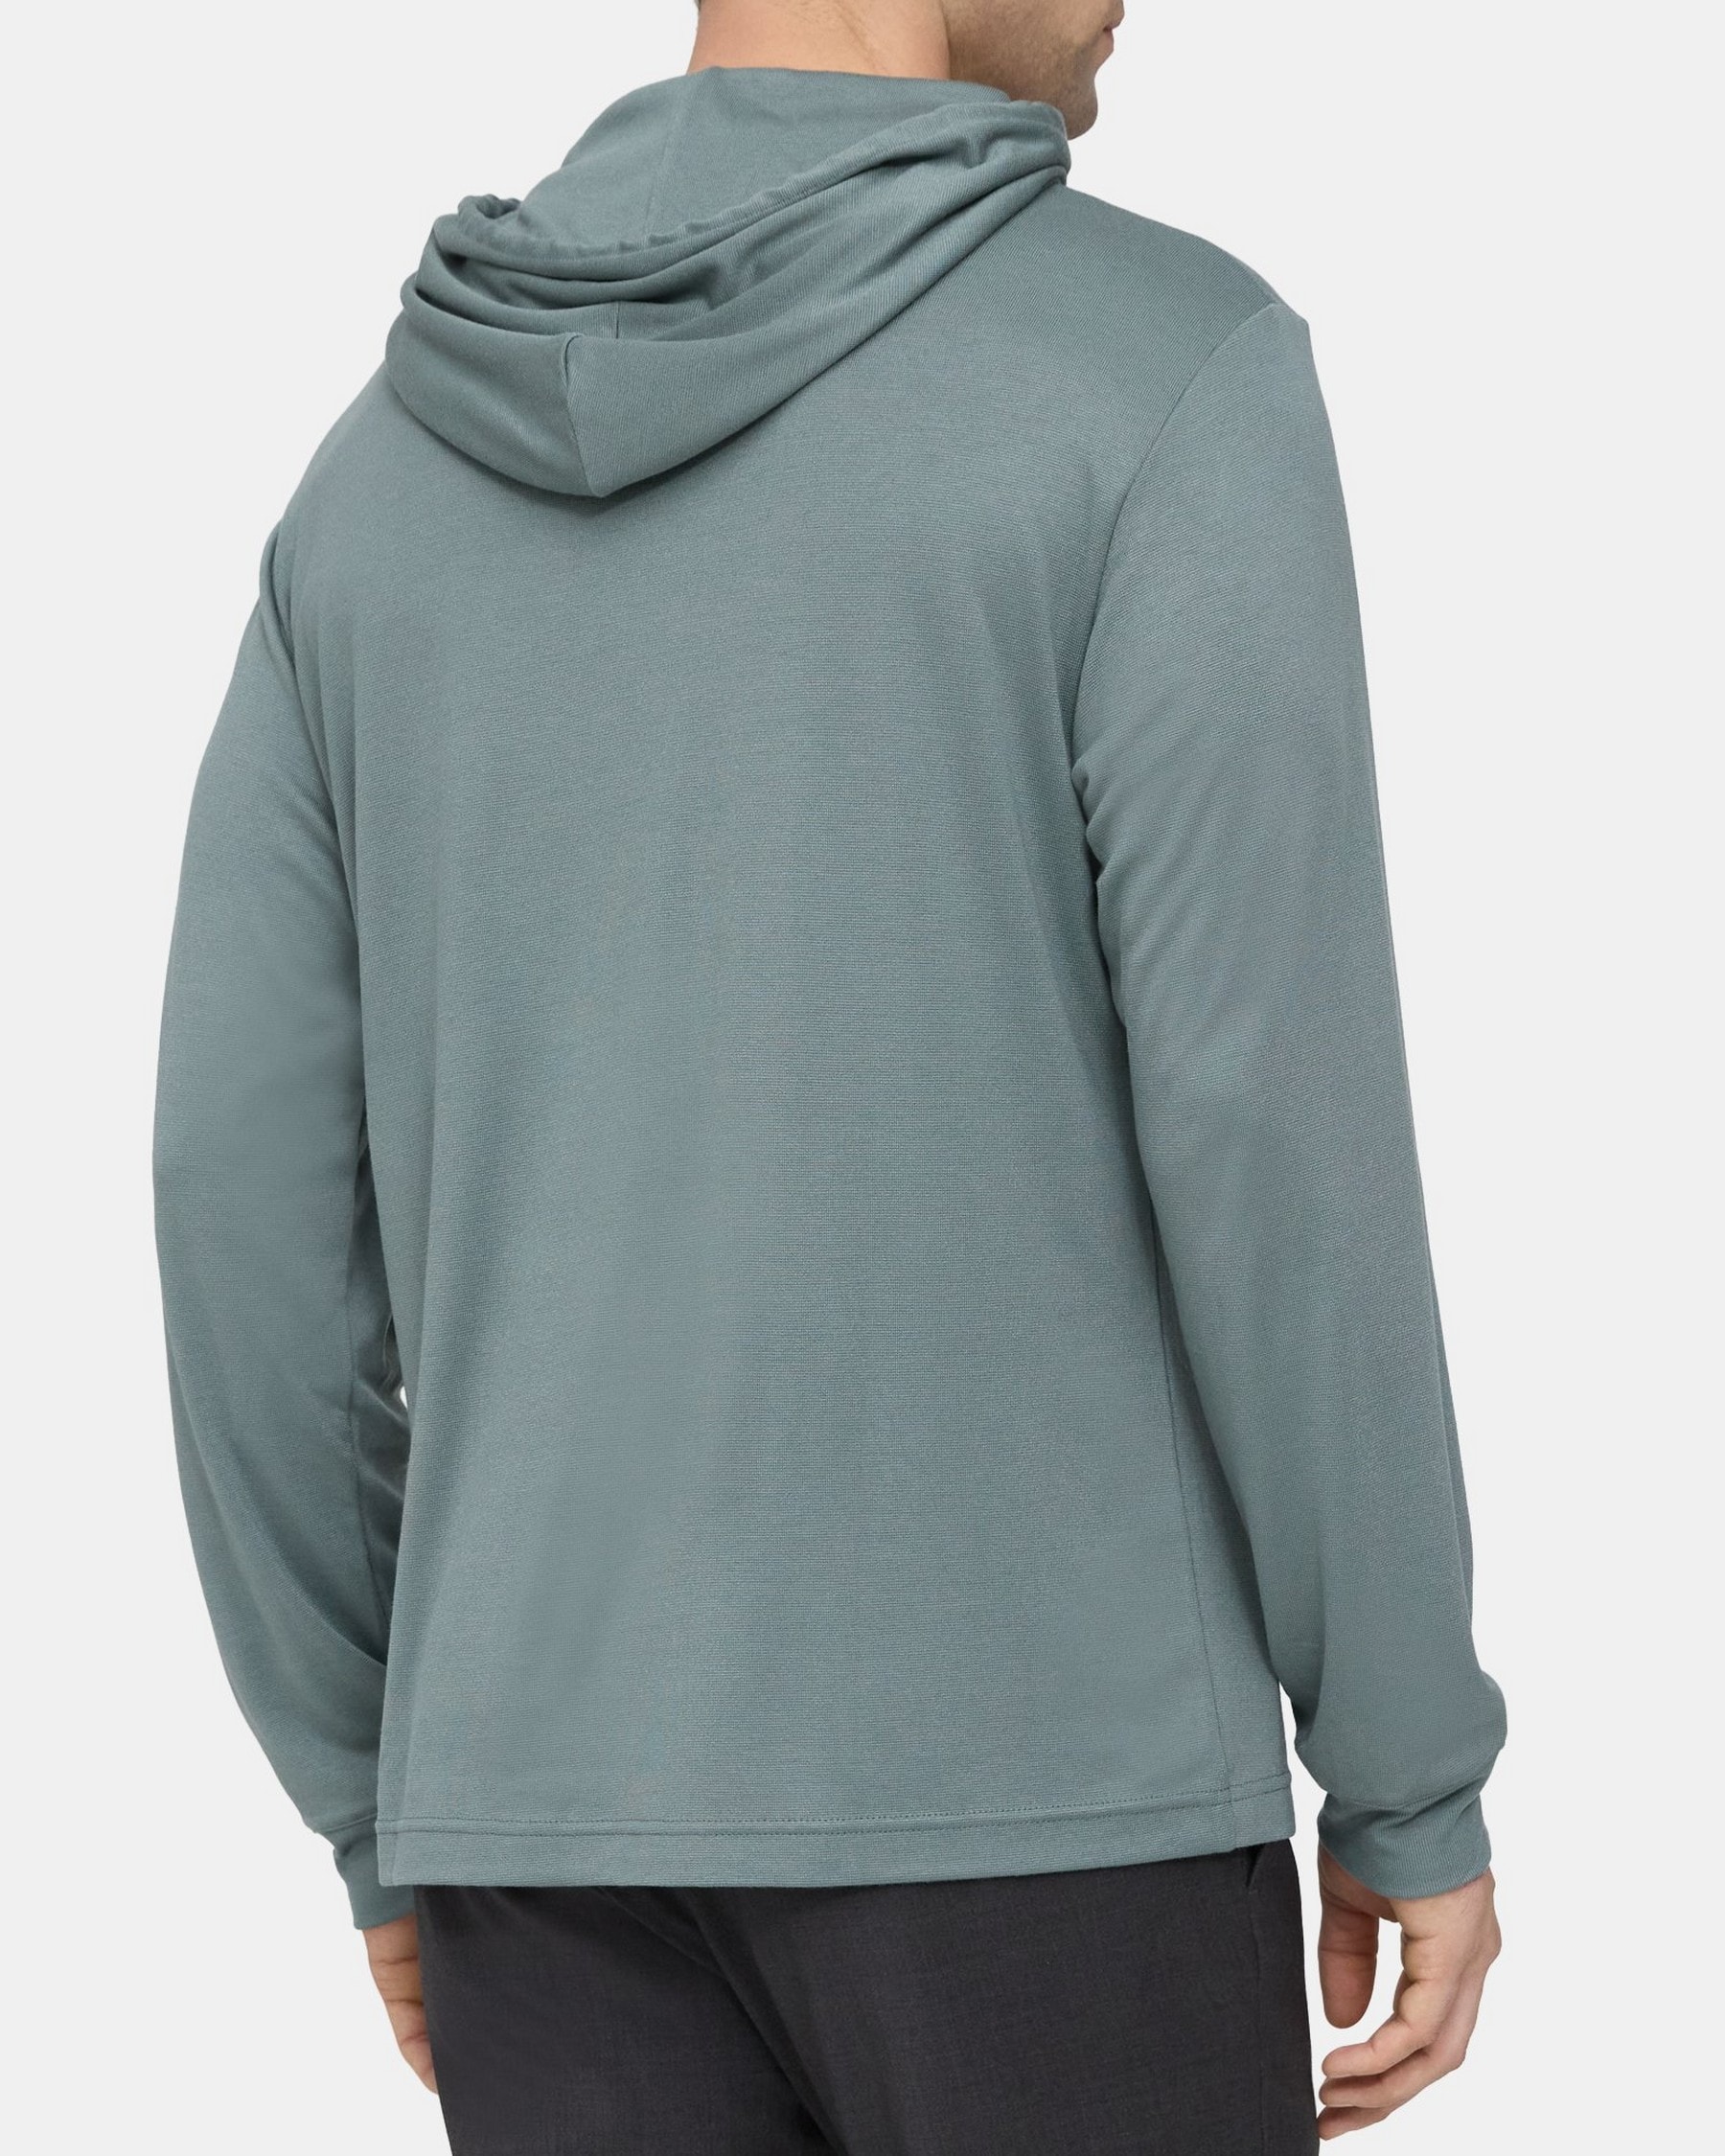 Traer Hoodie in Anemone Modal Jersey